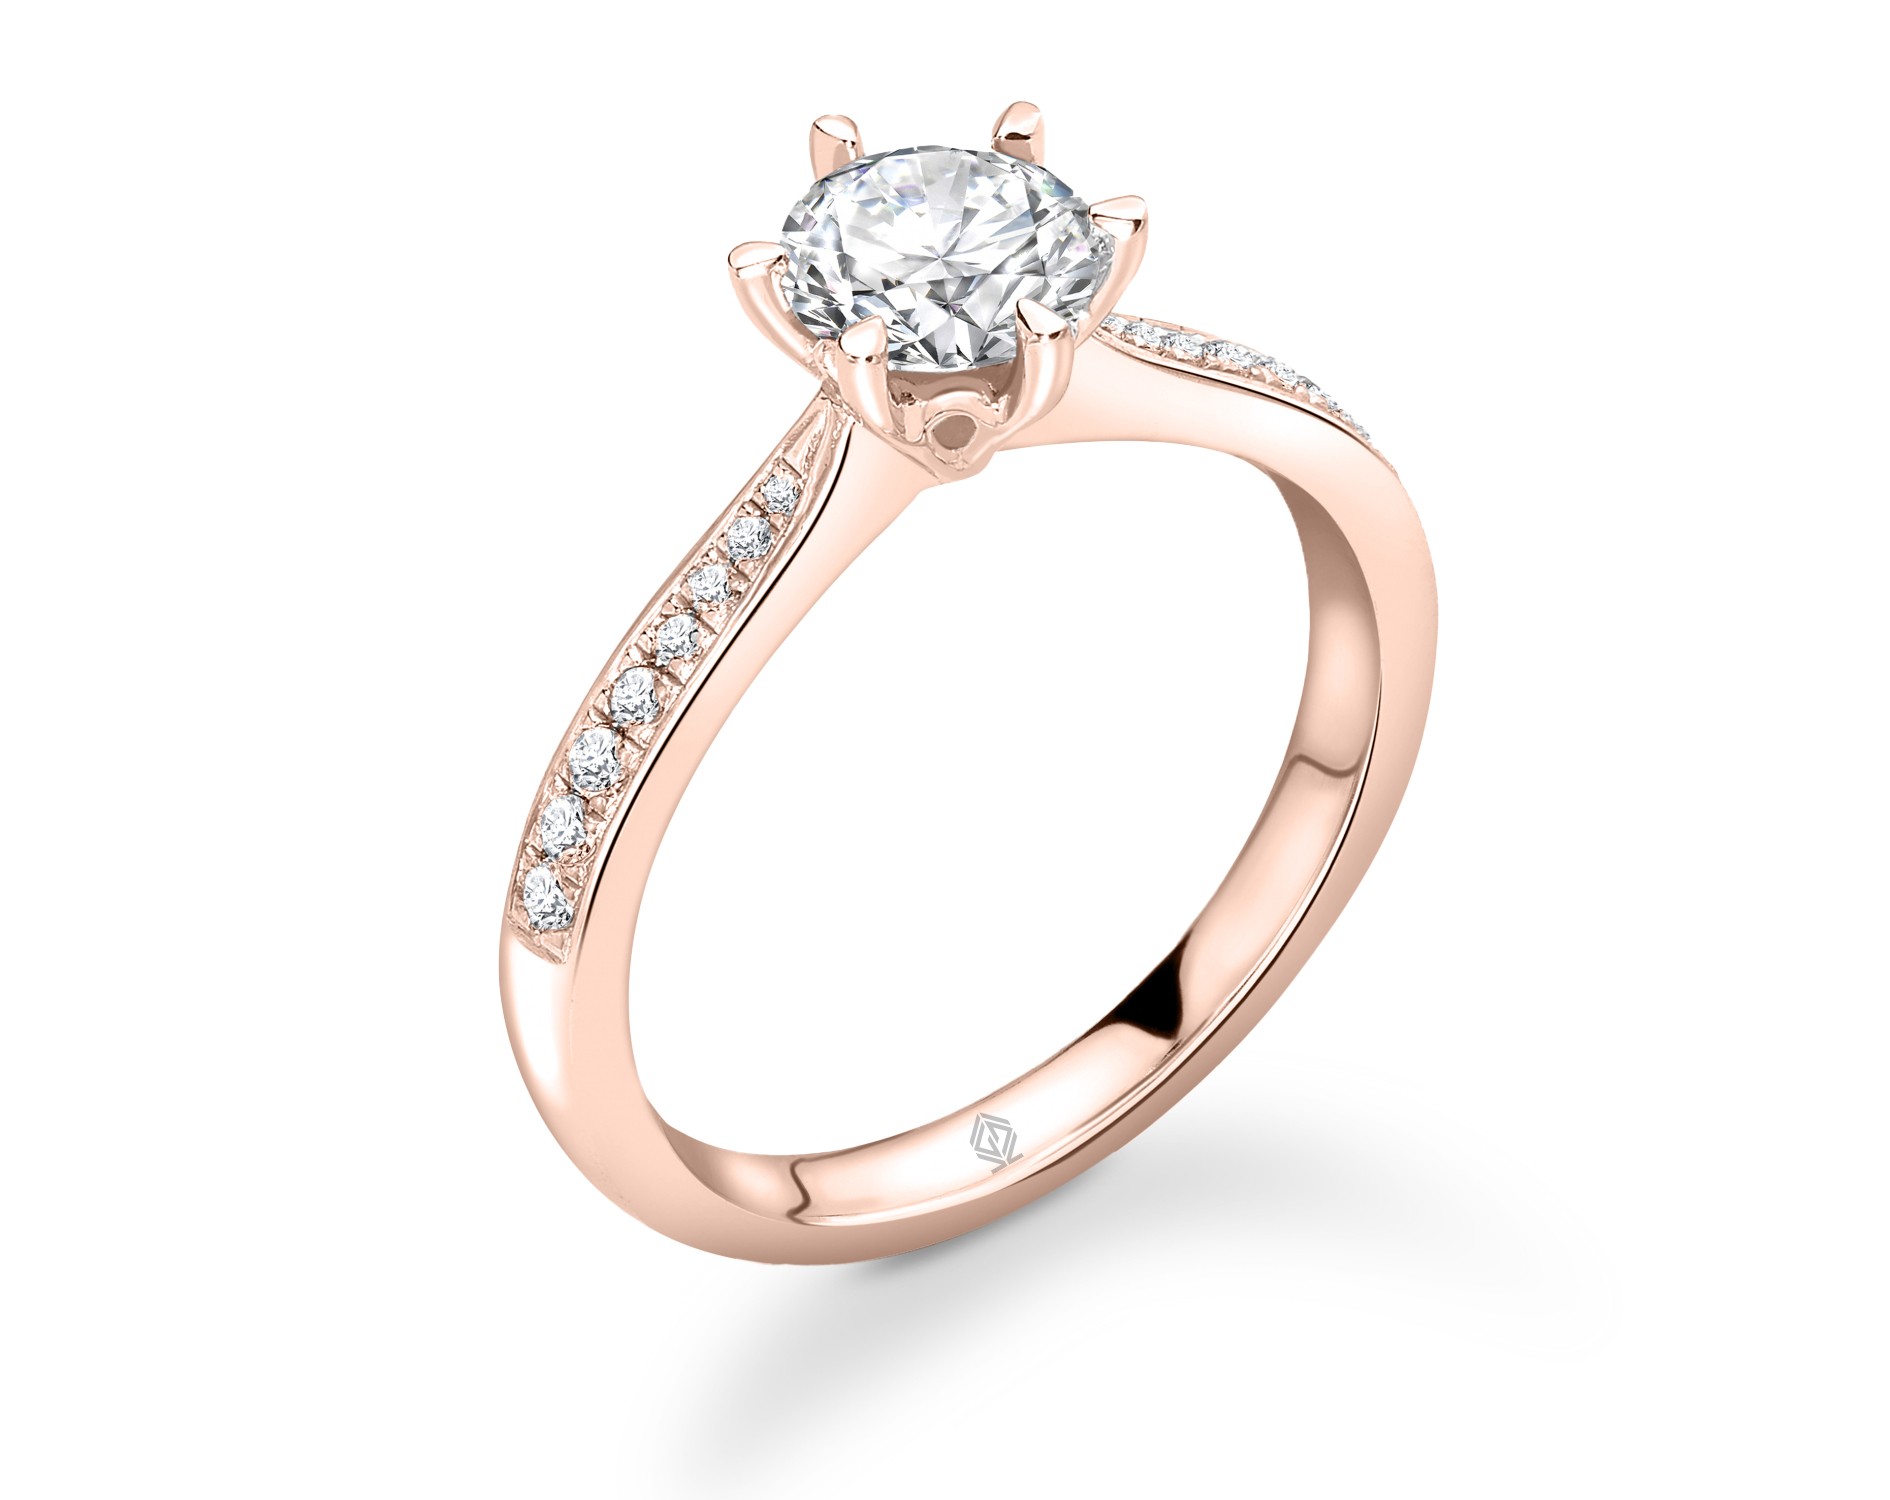 18K ROSE GOLD ROUND CUT 6 PRONGS DIAMOND ENGAGEMENT RING WITH CHANNEL SET SIDE STONES